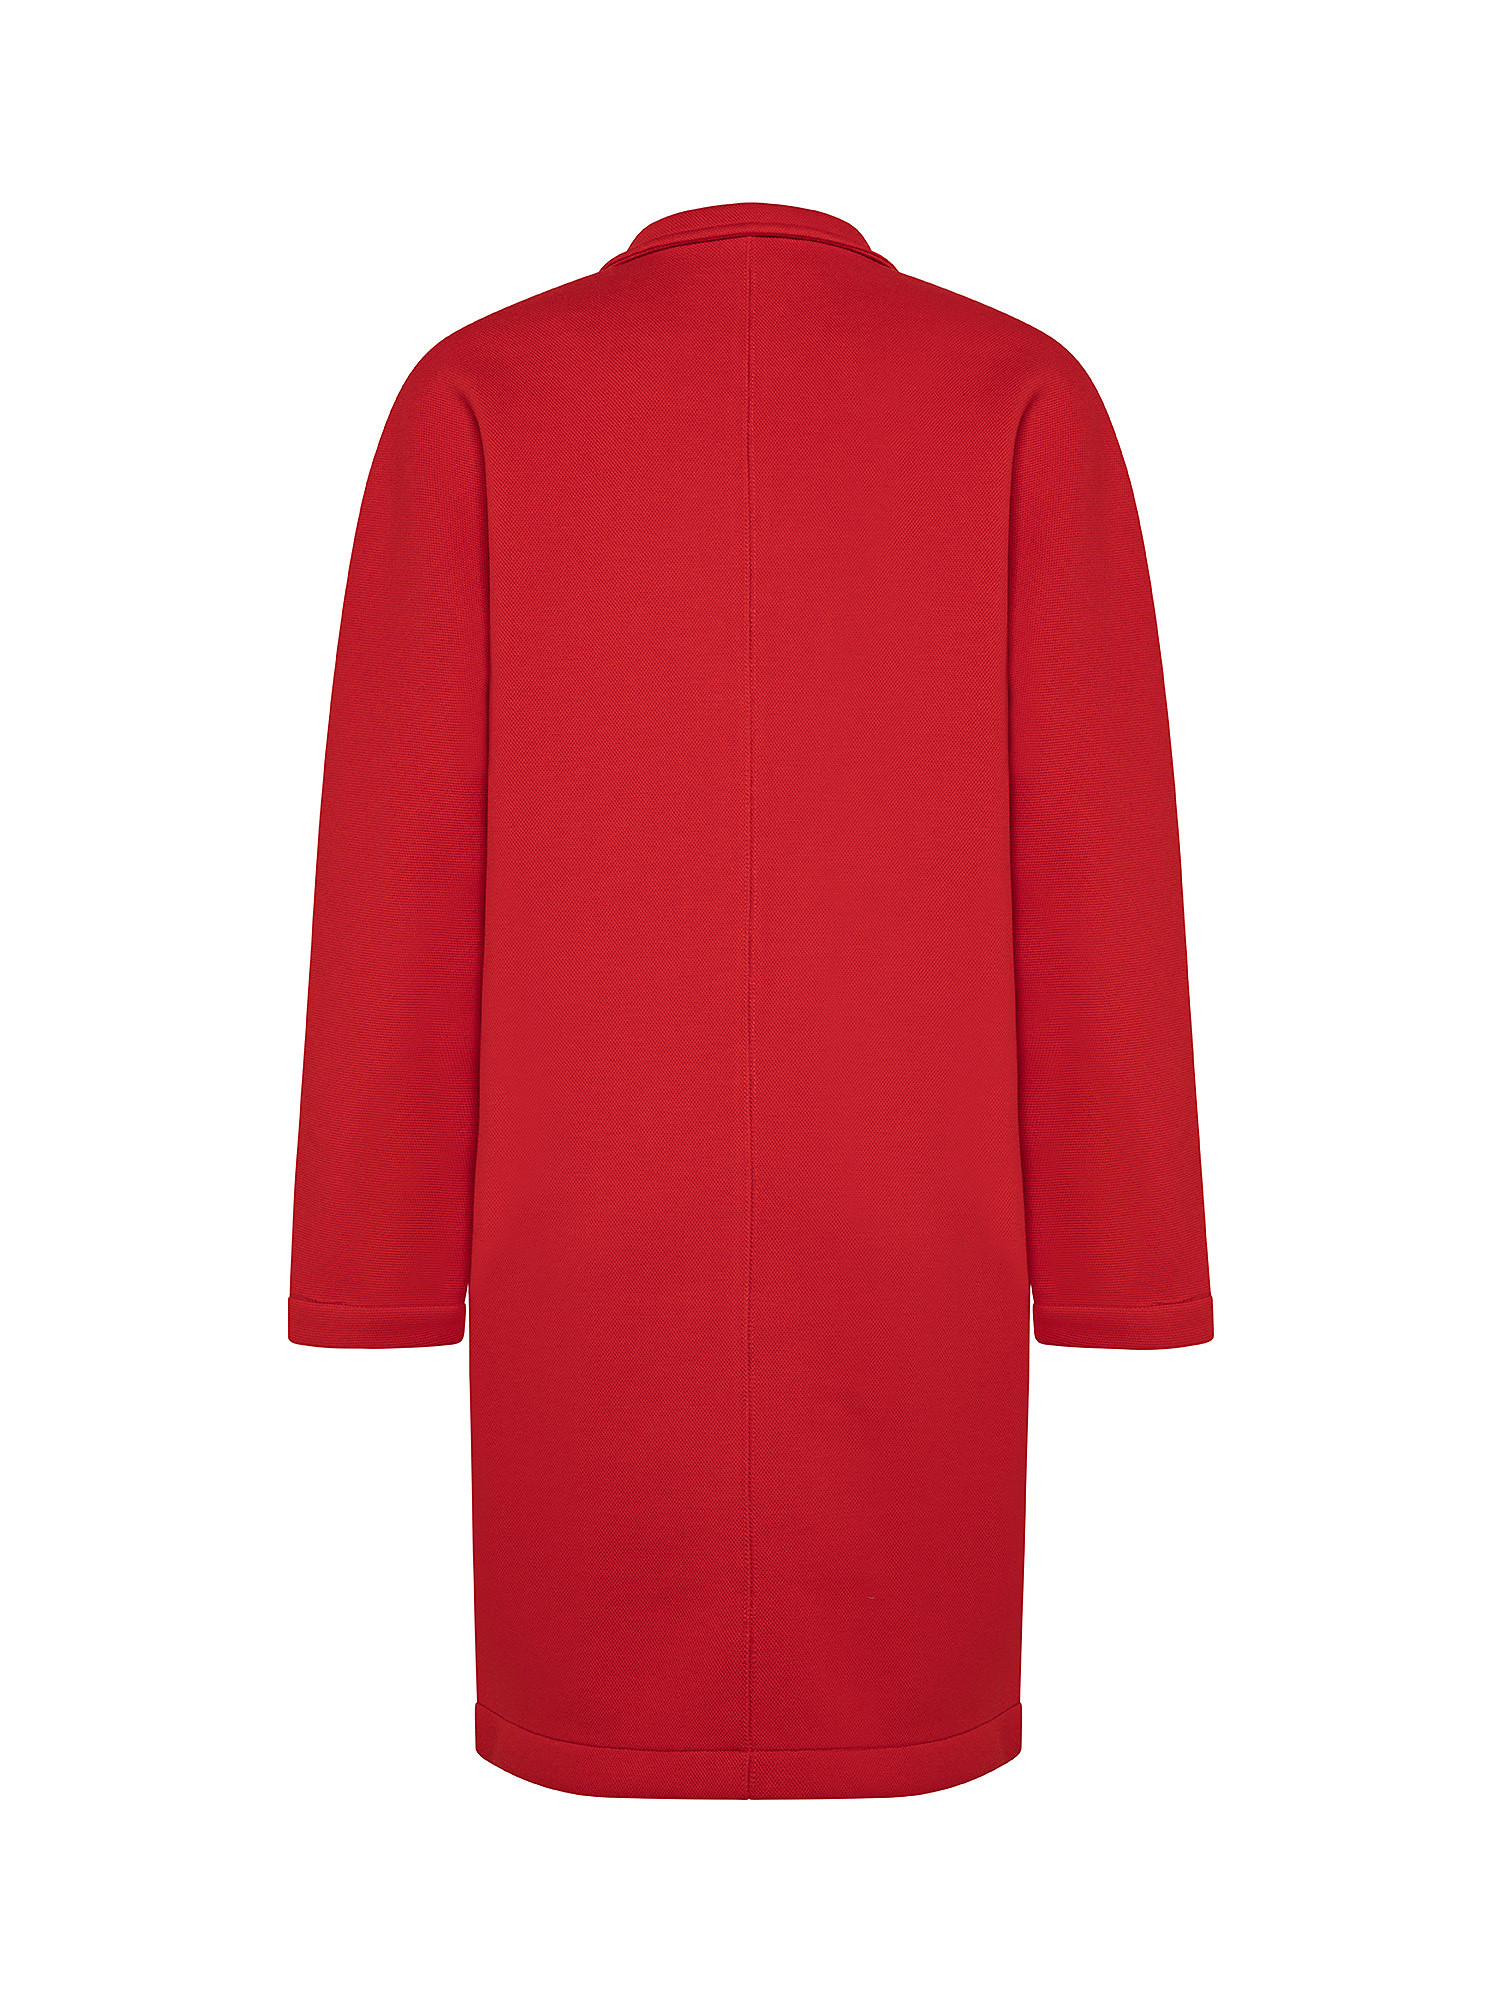 Oversize unlined coat, Red, large image number 1